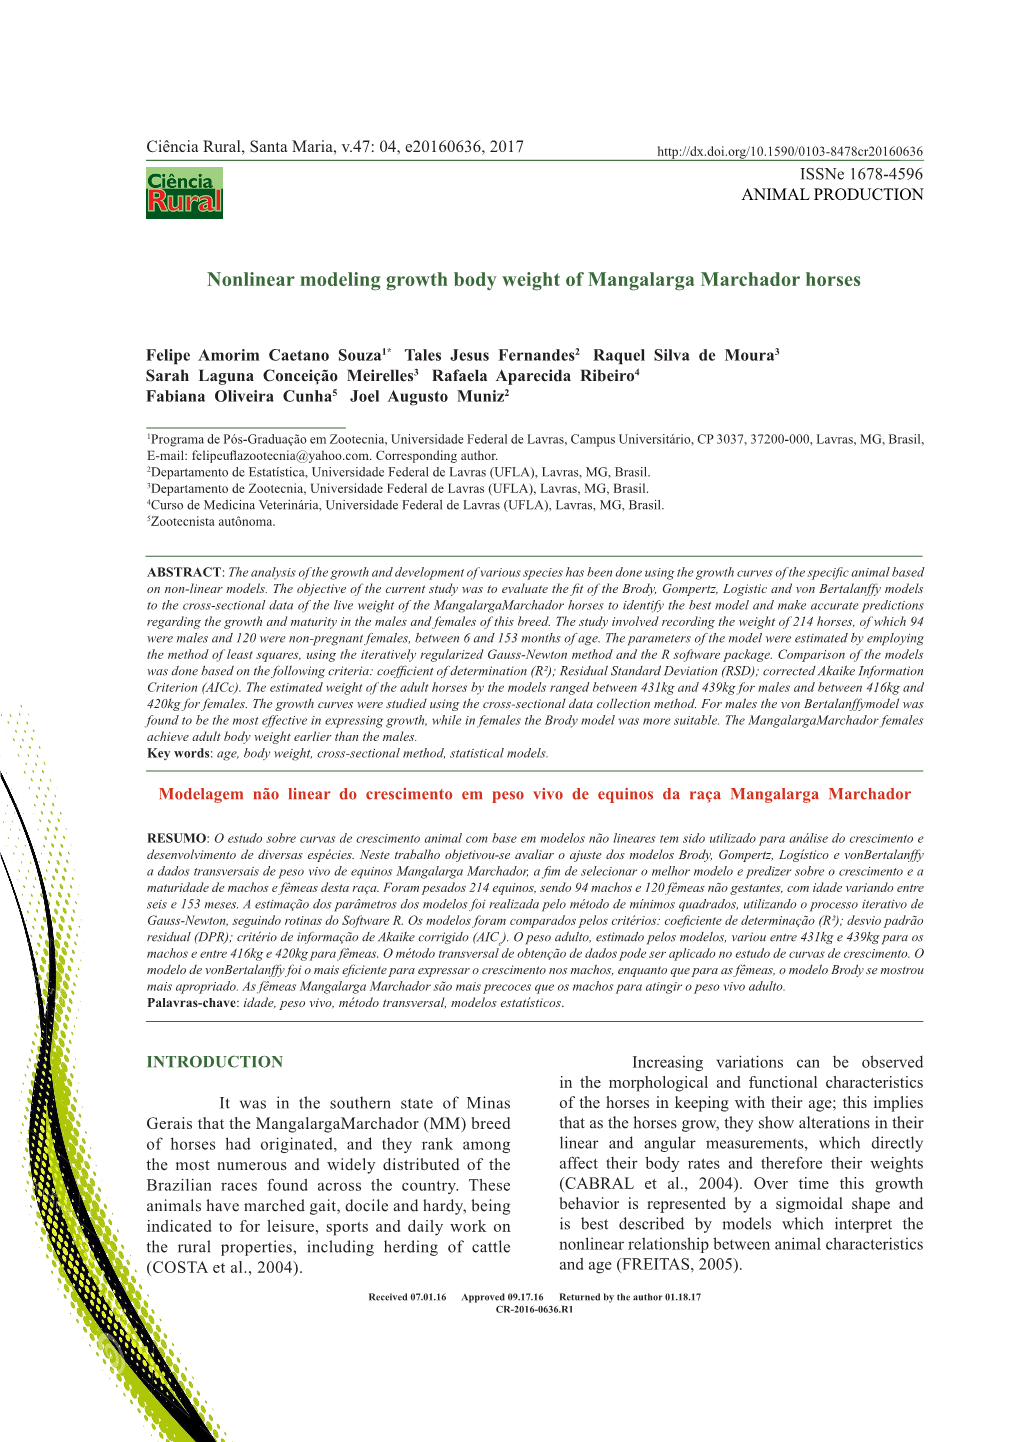 Nonlinear Modeling Growth Body Weight of Mangalarga Marchador Horses